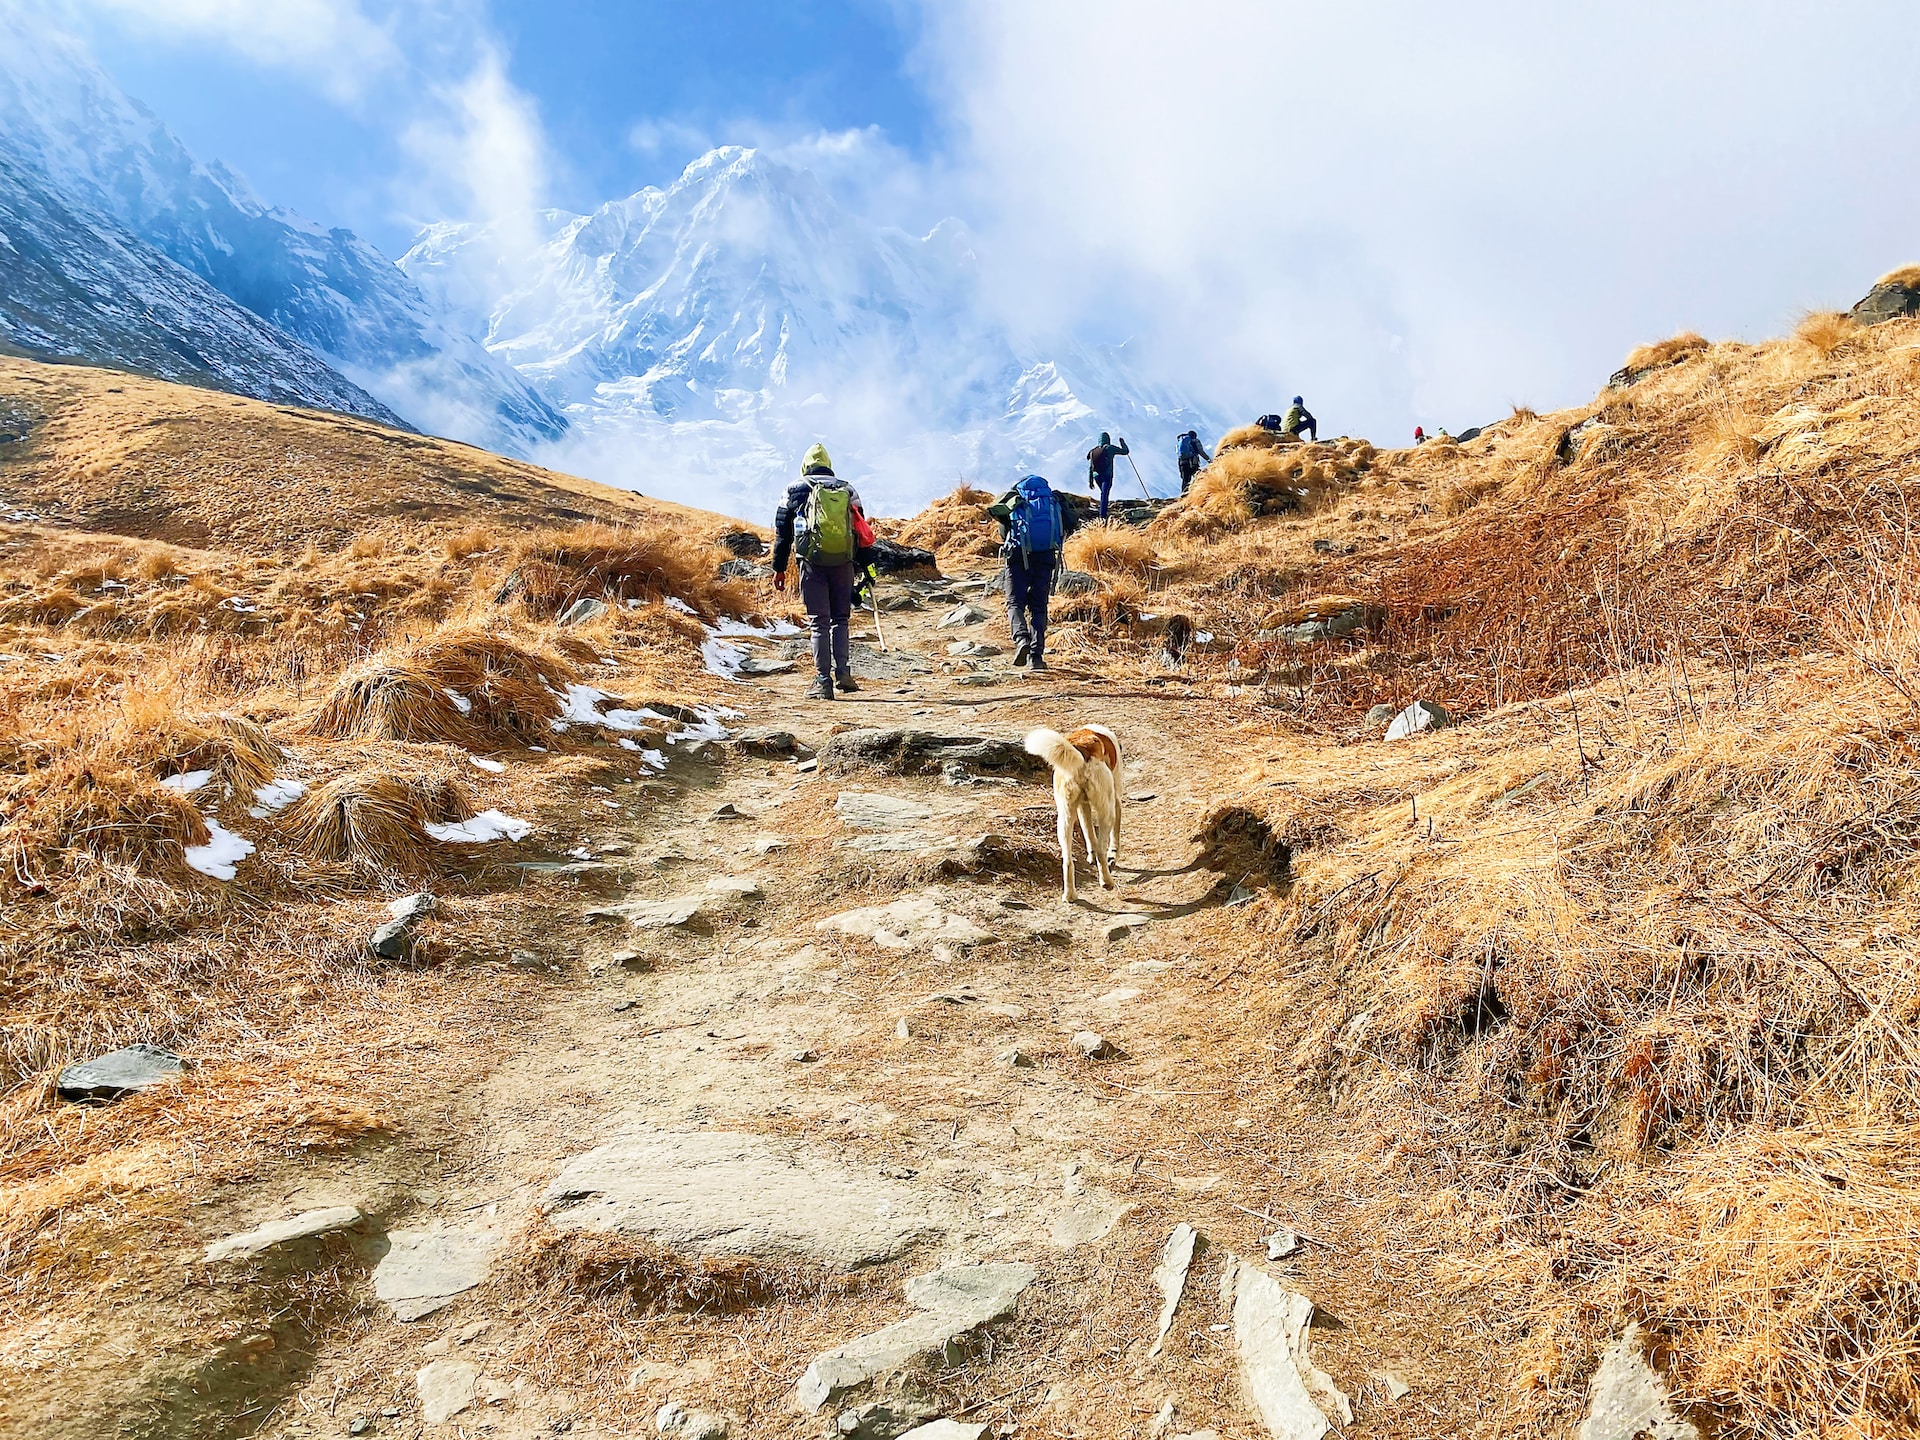 The Most Challenging Treks for Adventure Seekers